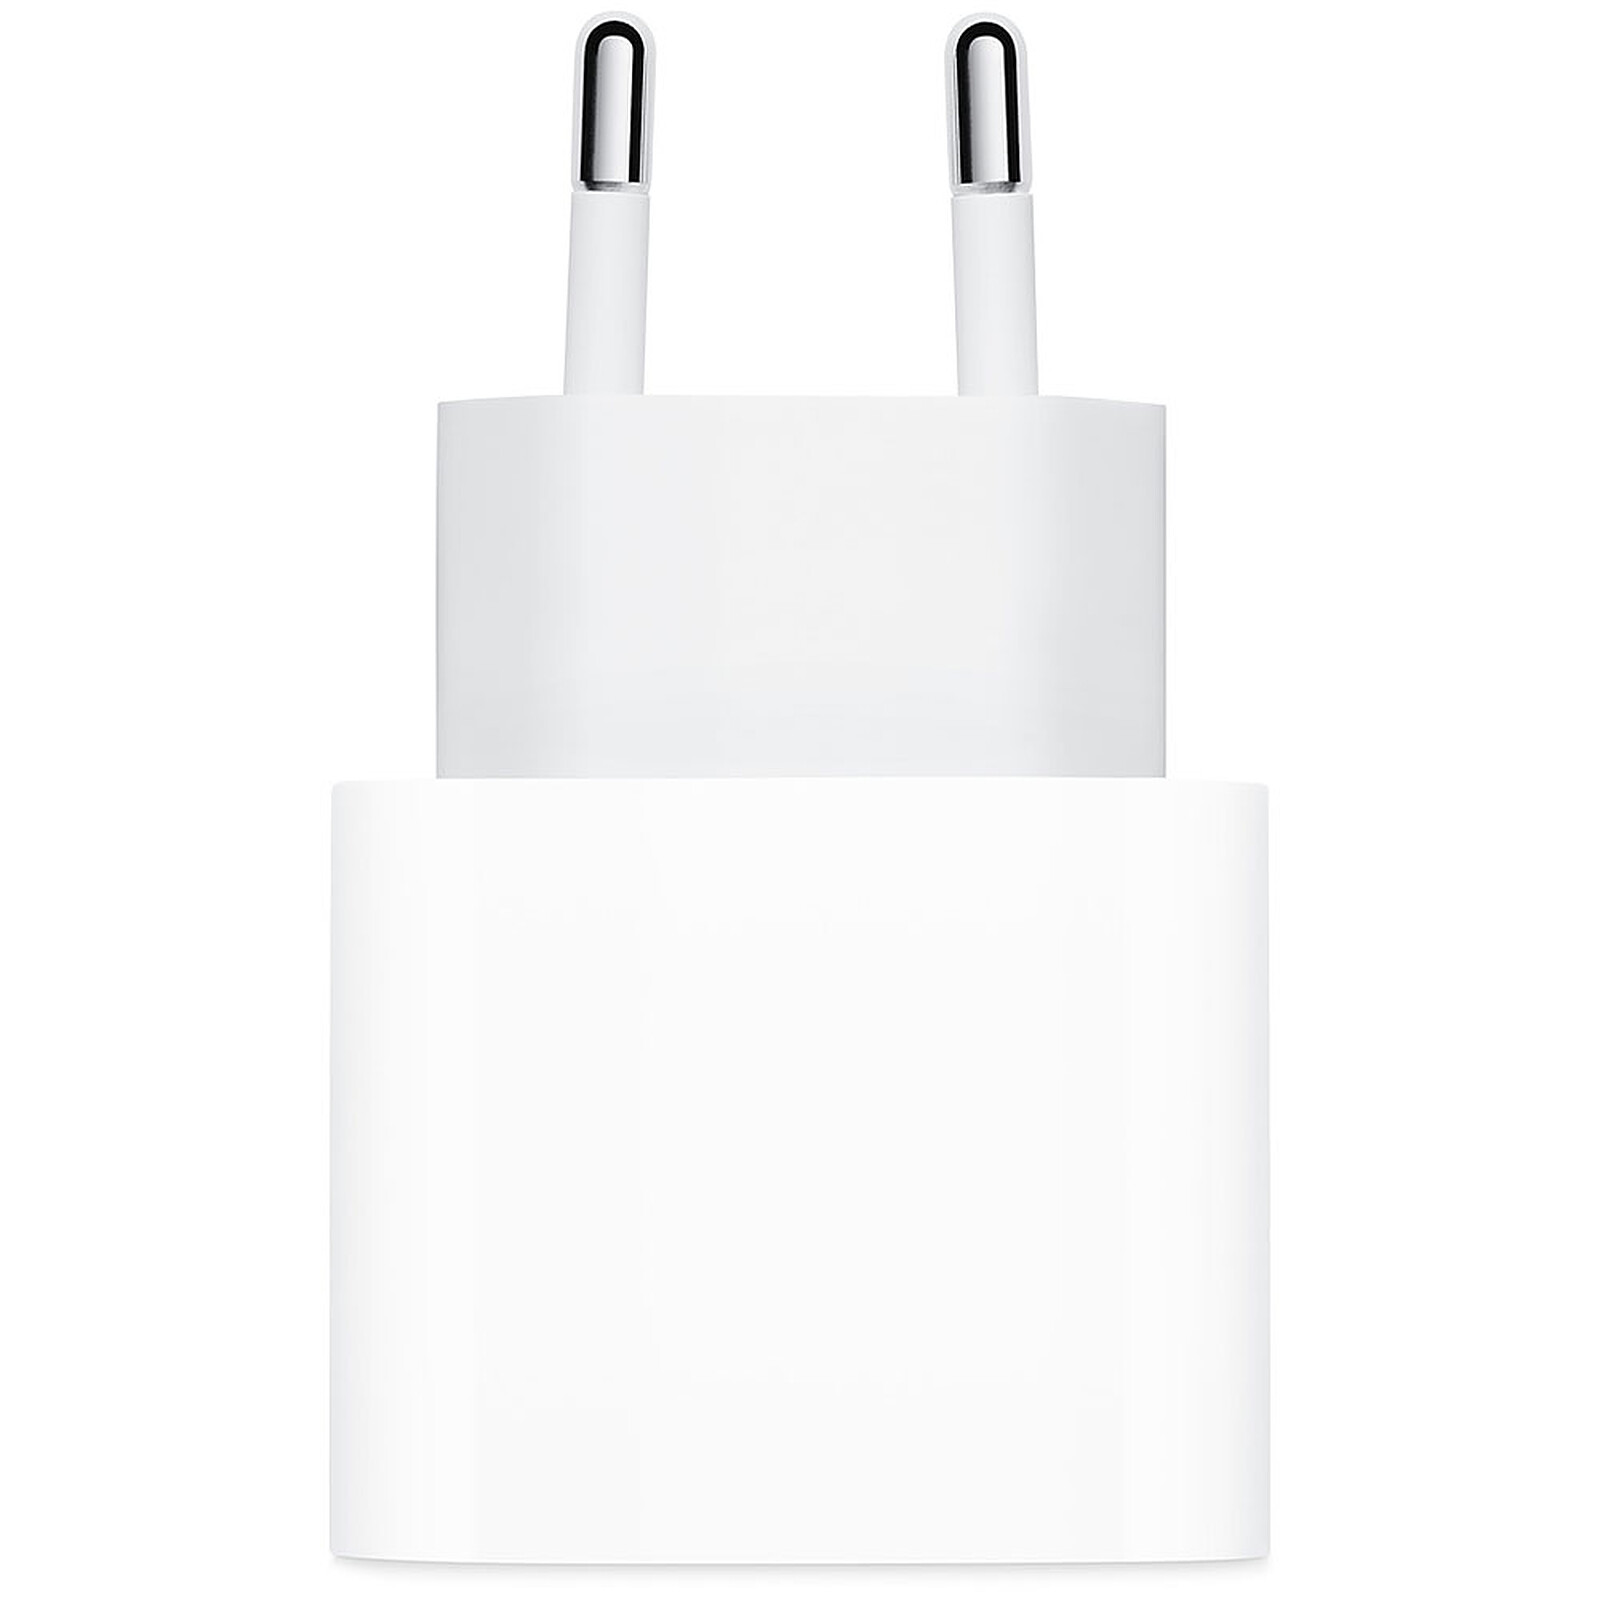 General - Chargeur iPhone charge rapide bloc chargeur mural Apple